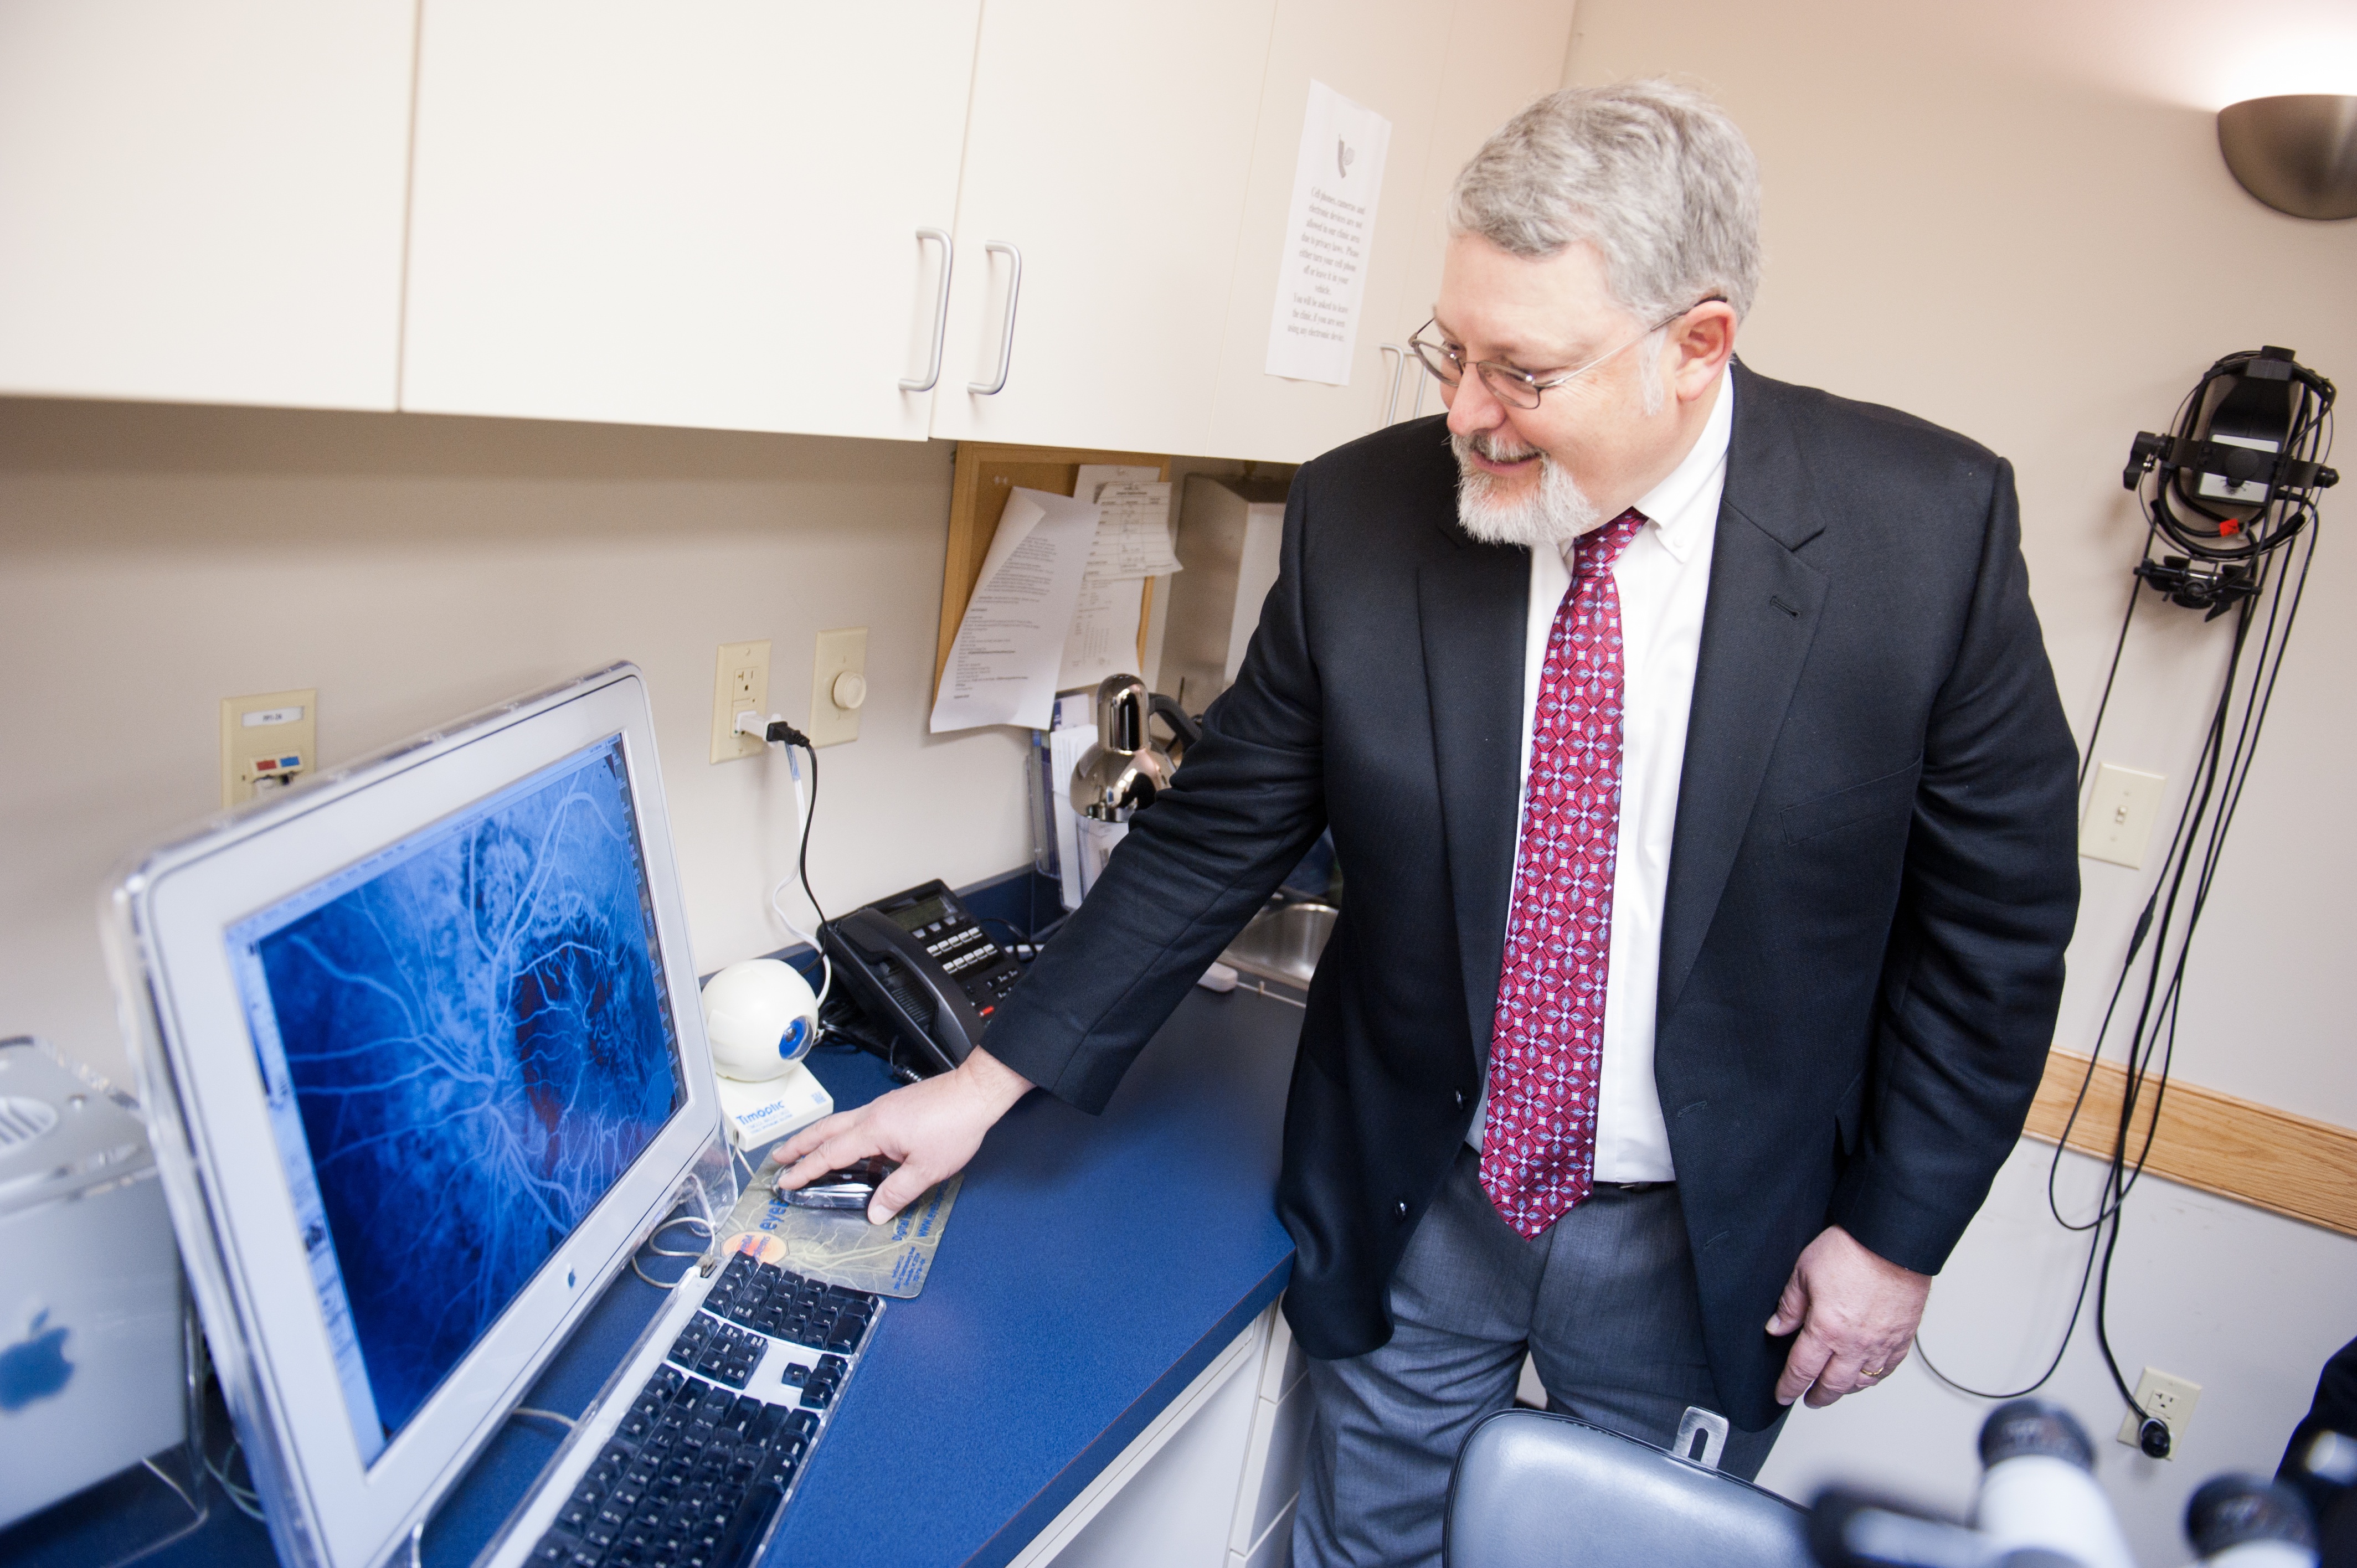 Dr. Peter Van Houten is a physician at East Carolina Retina Consultants